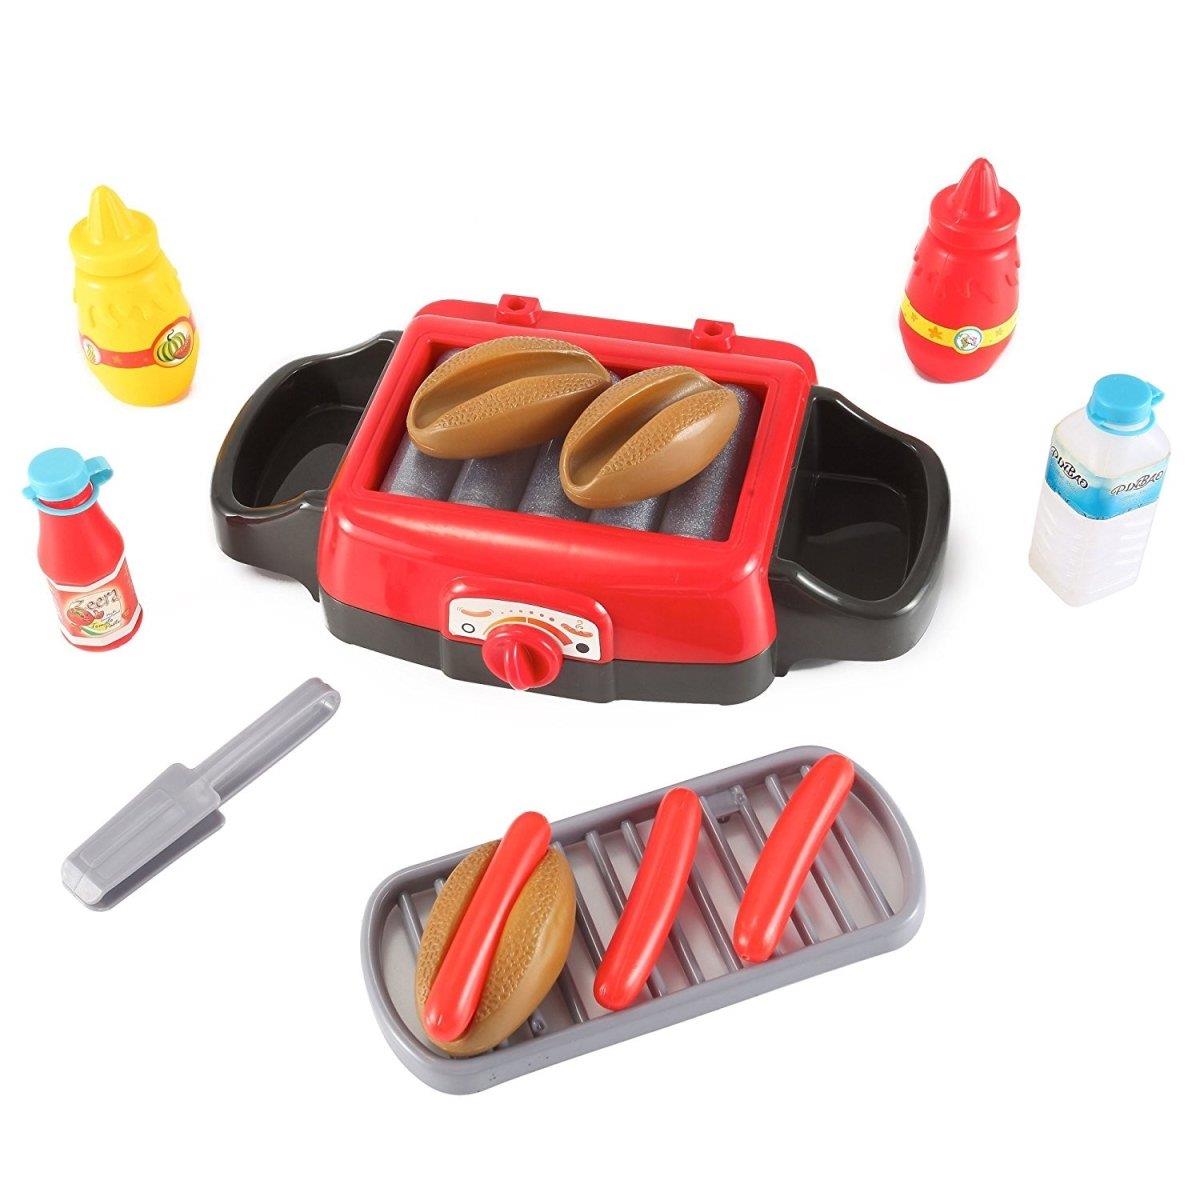 Picture of Azimport PS28 Hot Dog Roller Grill Electric Stove Play Food Kitchen Appliance Set for Kids